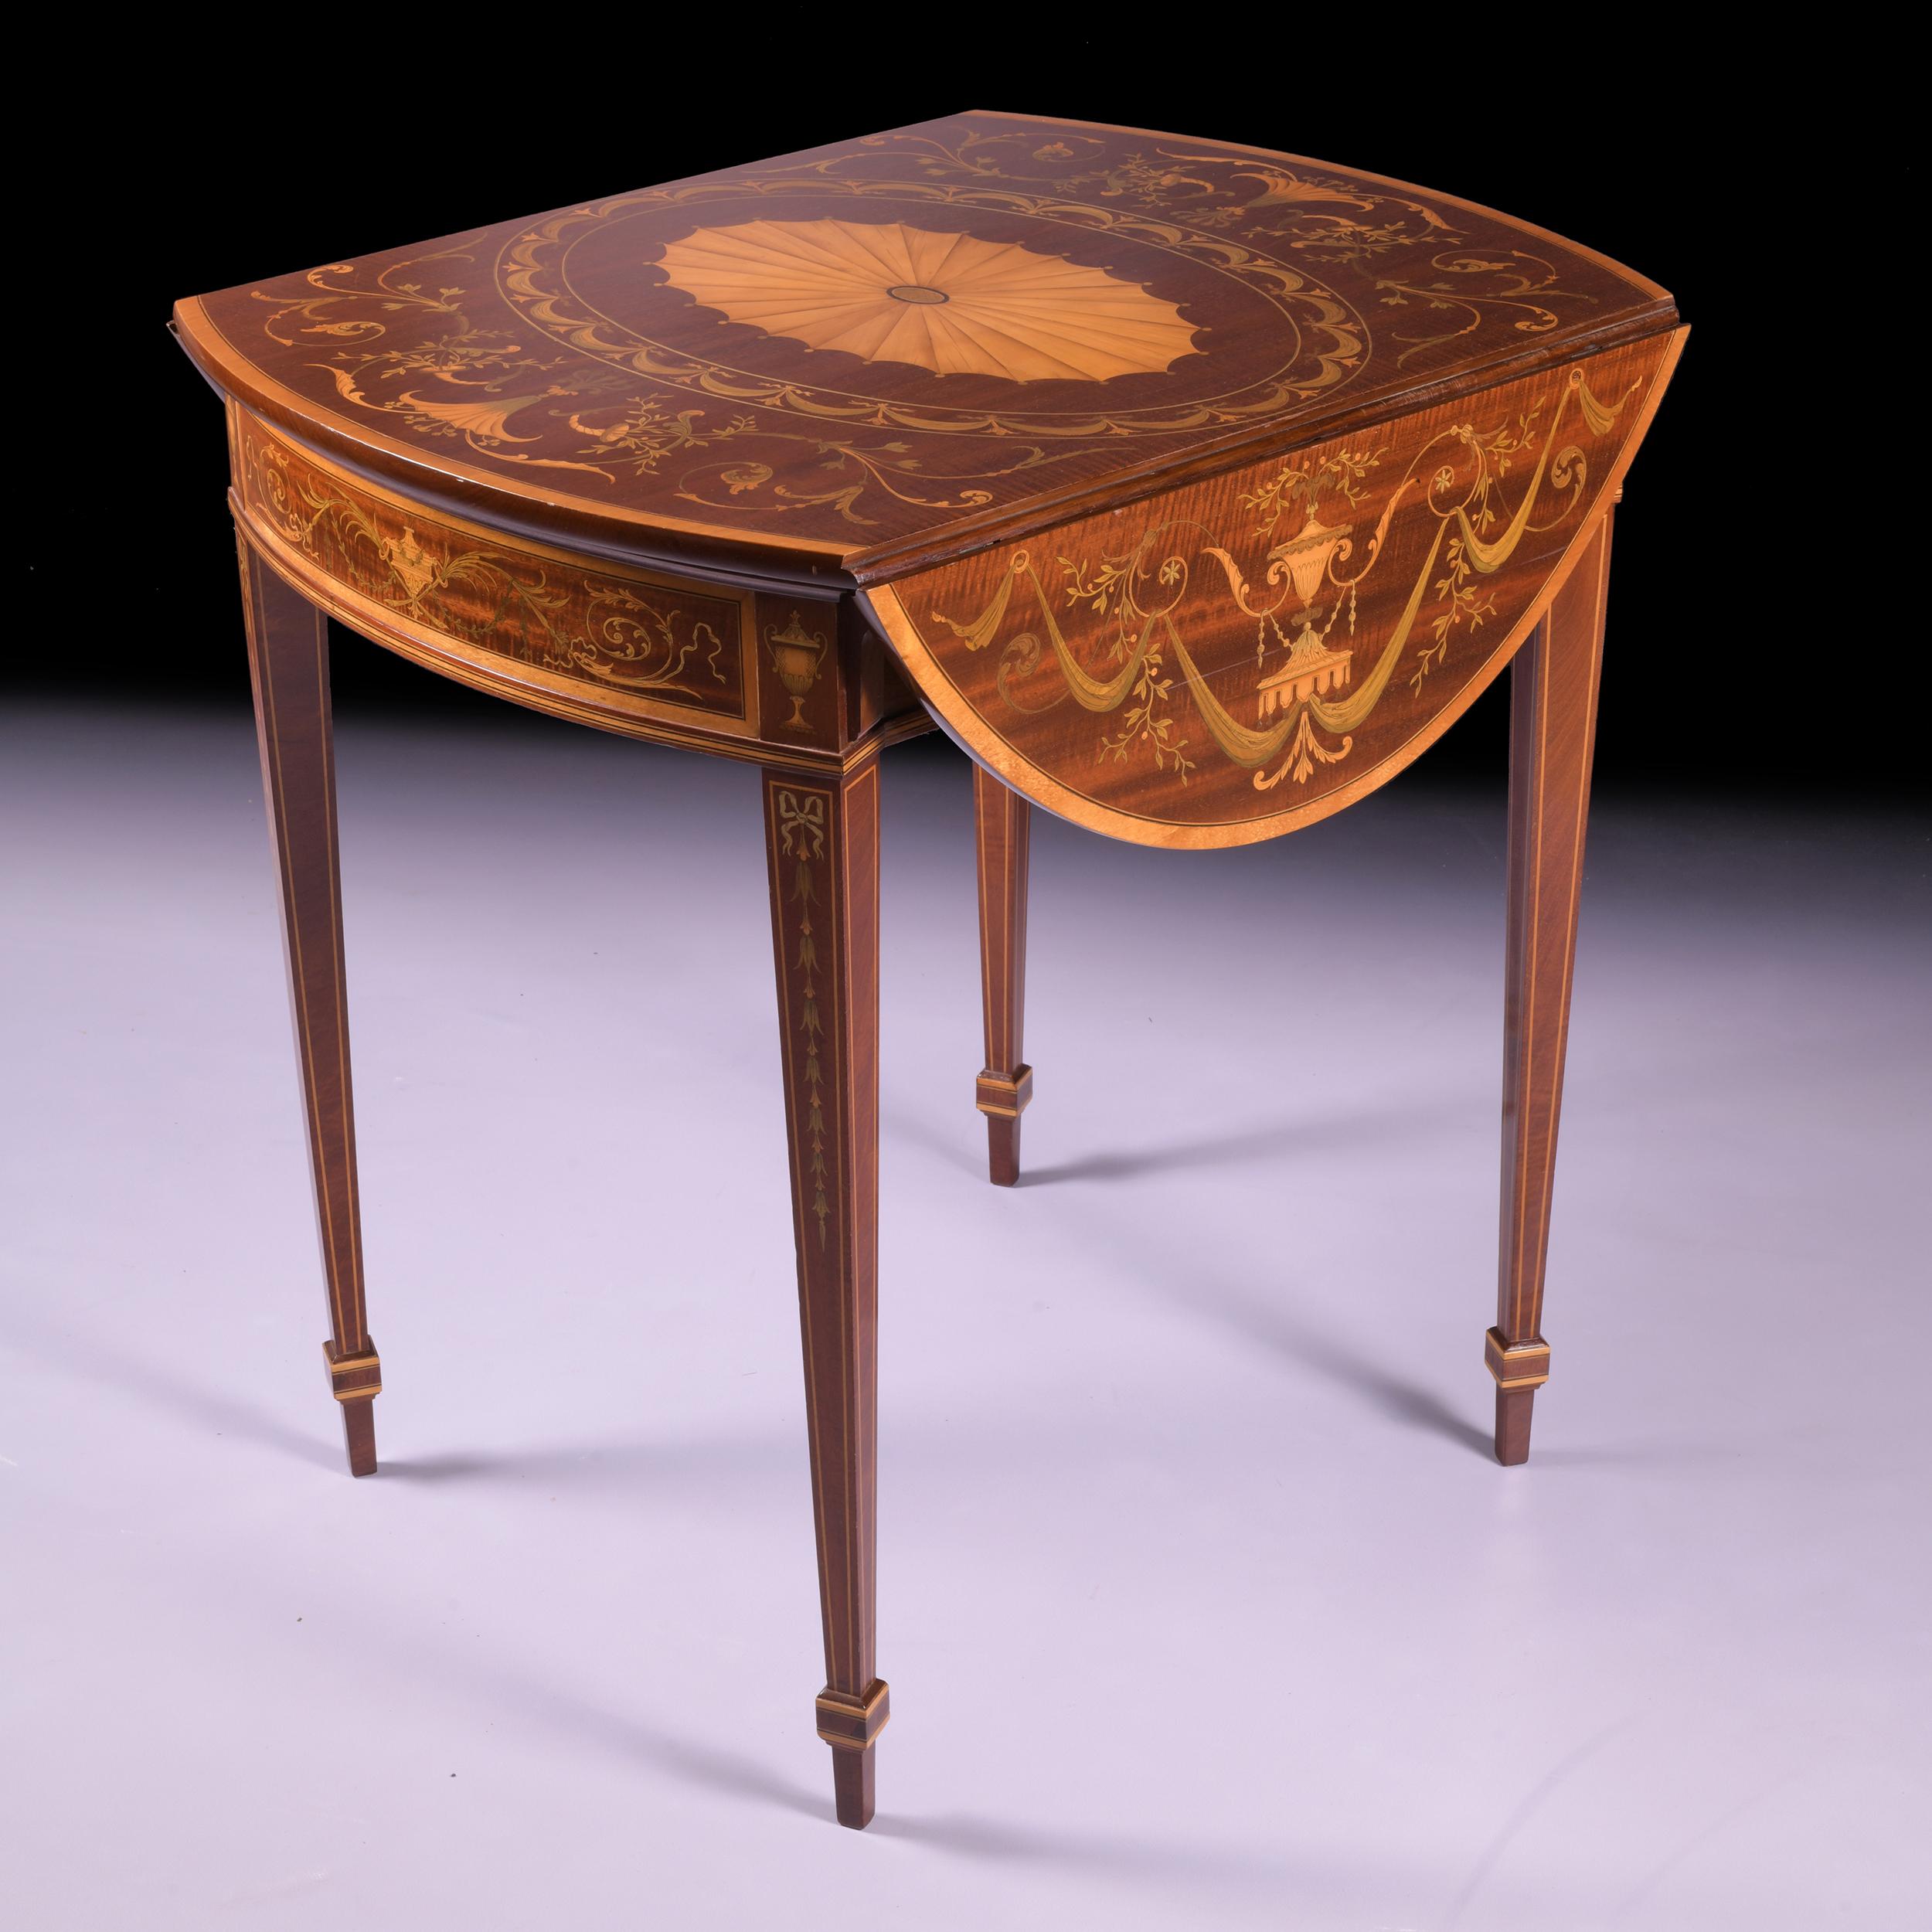 Late 19th Century English Edwardian Satinwood Pembroke Table By Edwards & Robert In Excellent Condition For Sale In Dublin, IE